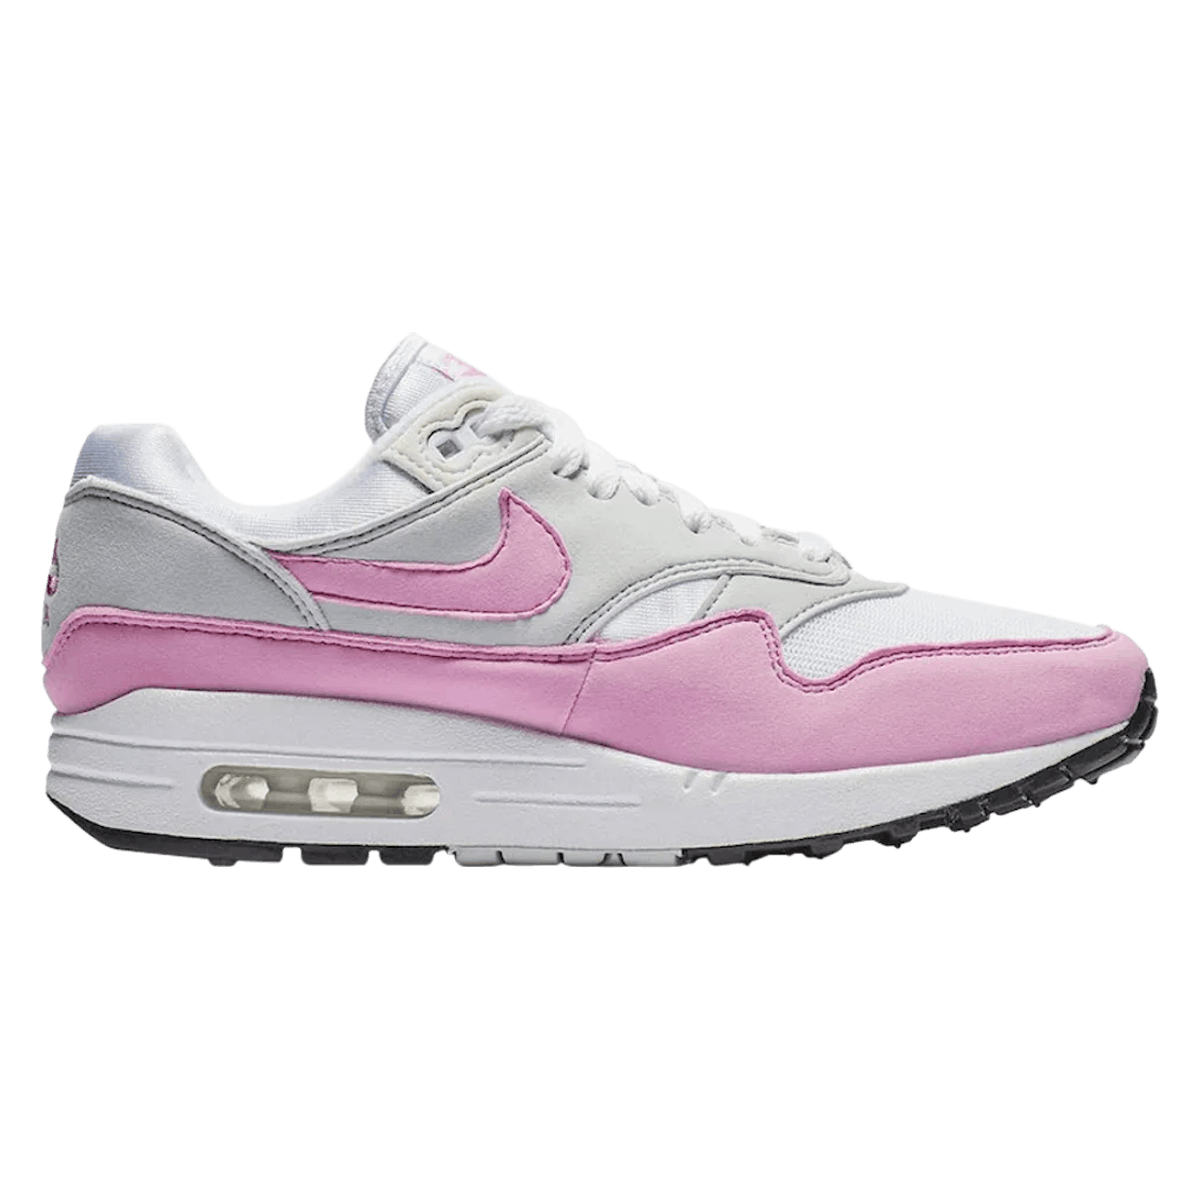 Nike Air Max 1 WMNS "Psychic Pink"